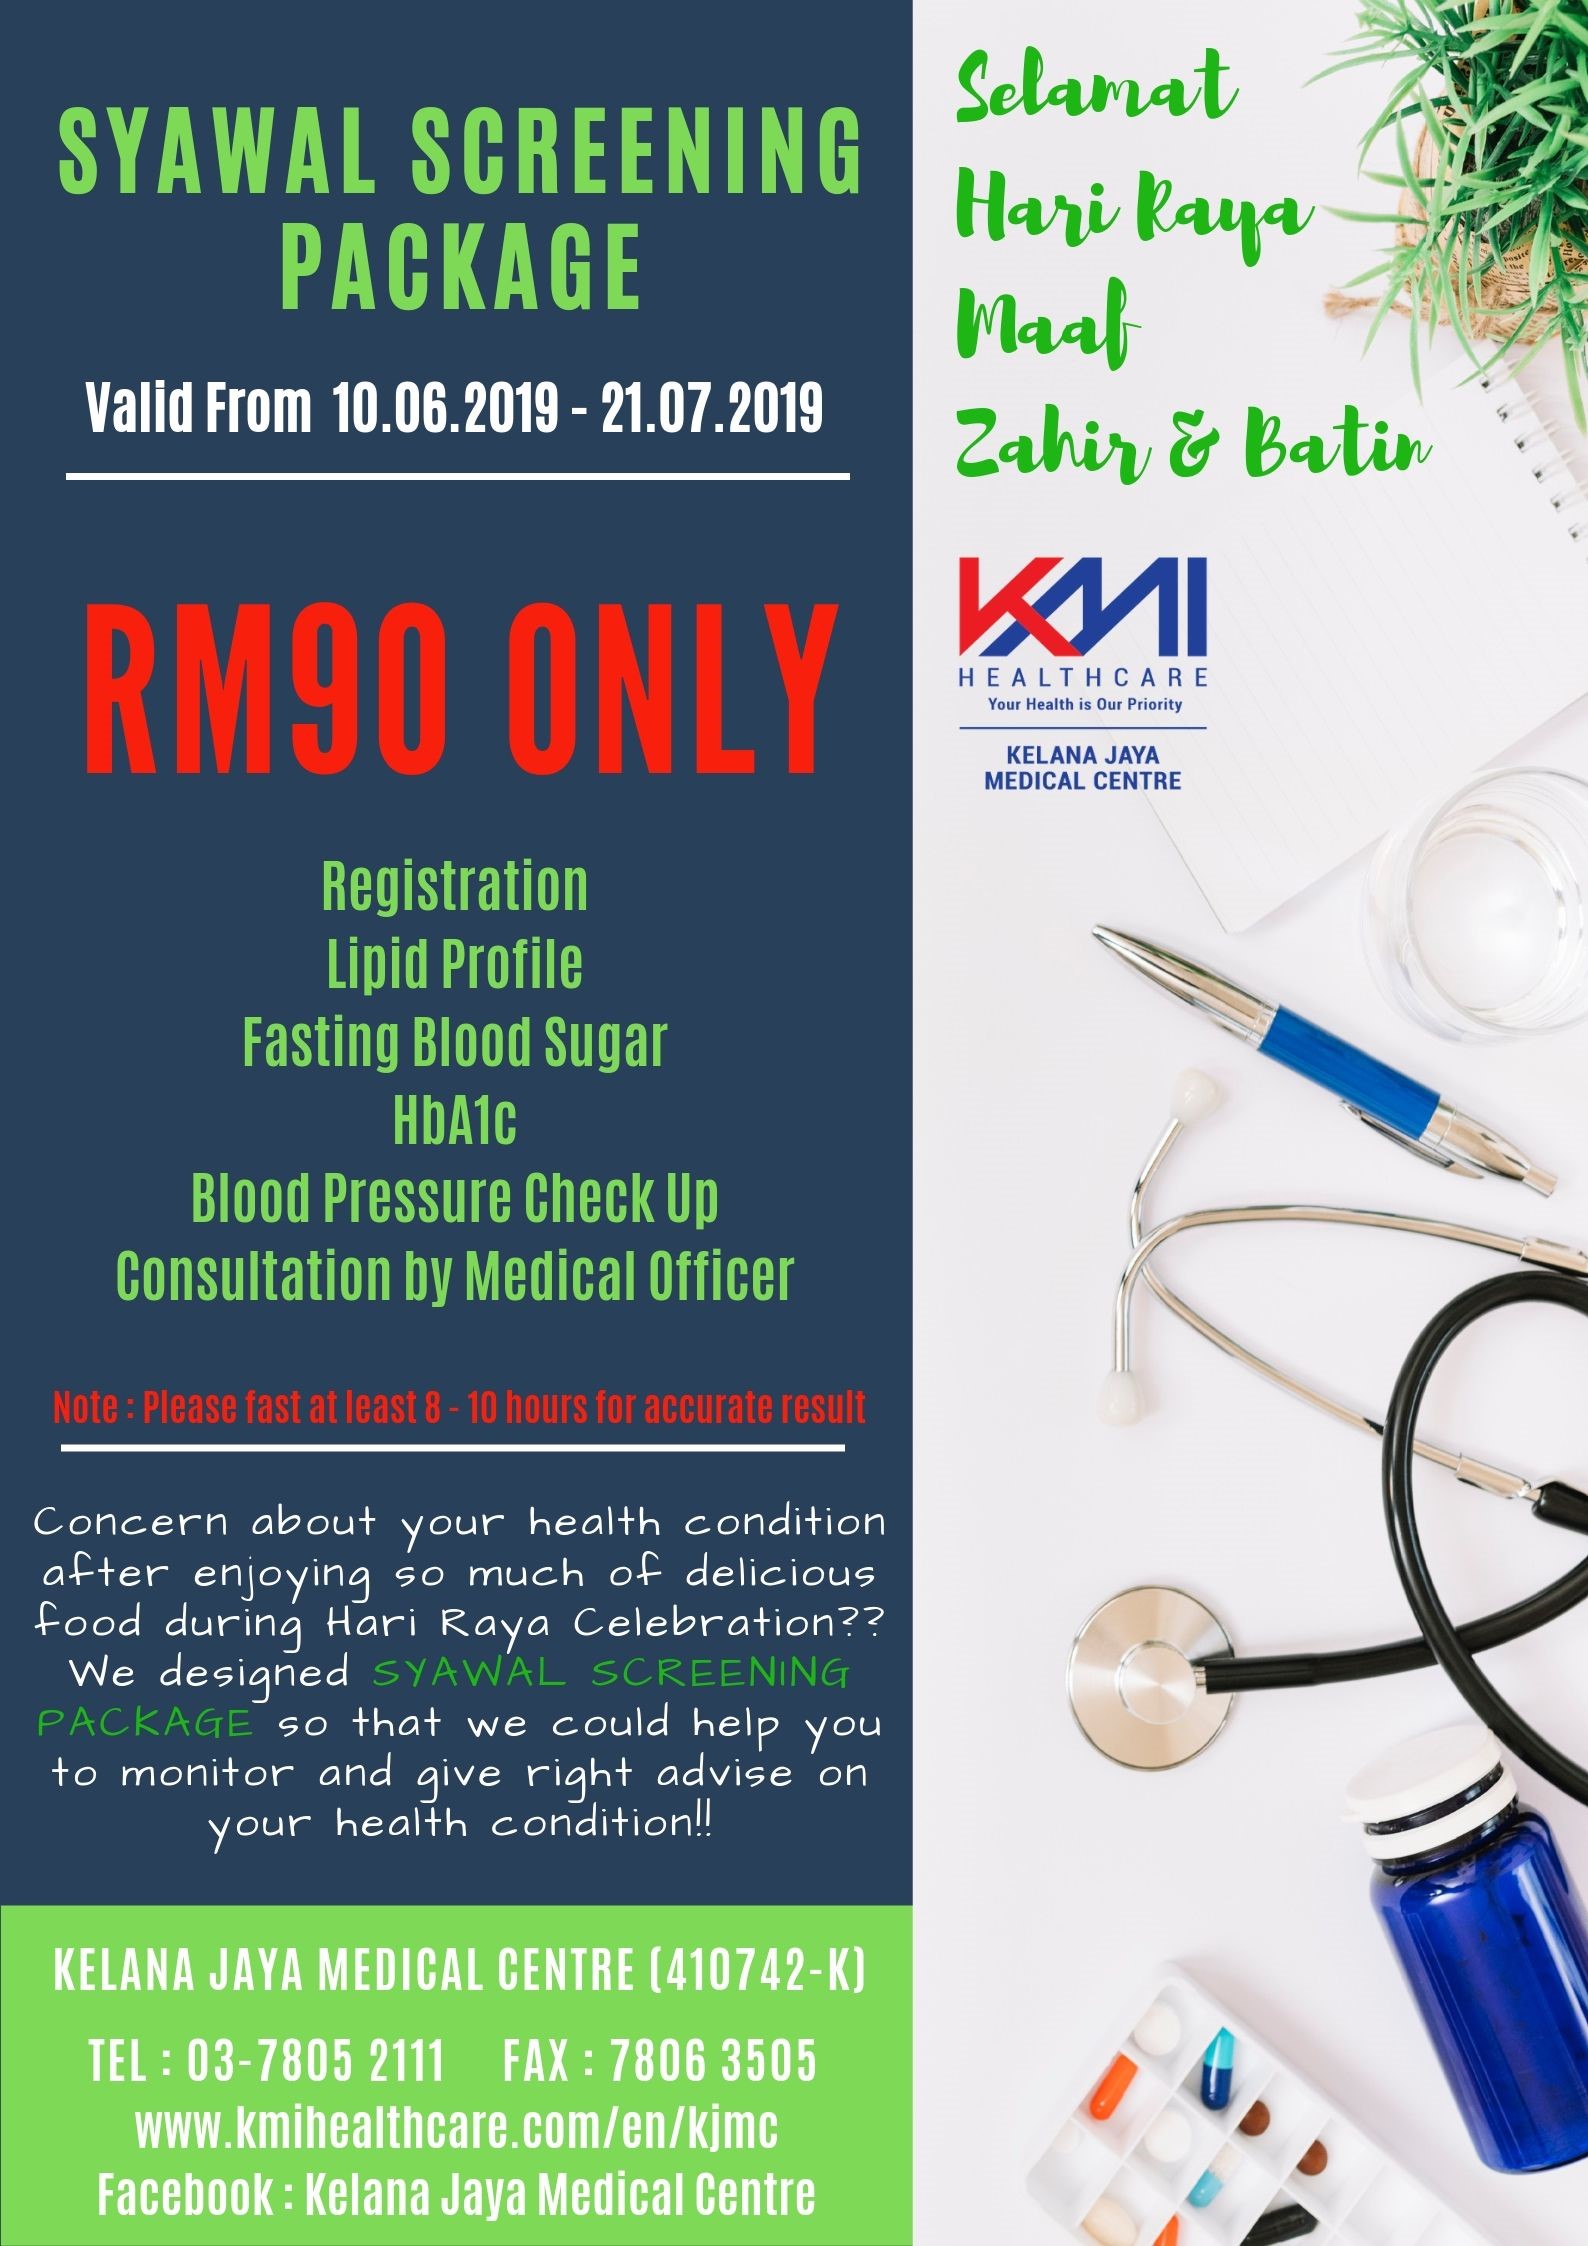 Malaysia 2021 screening package promotion health